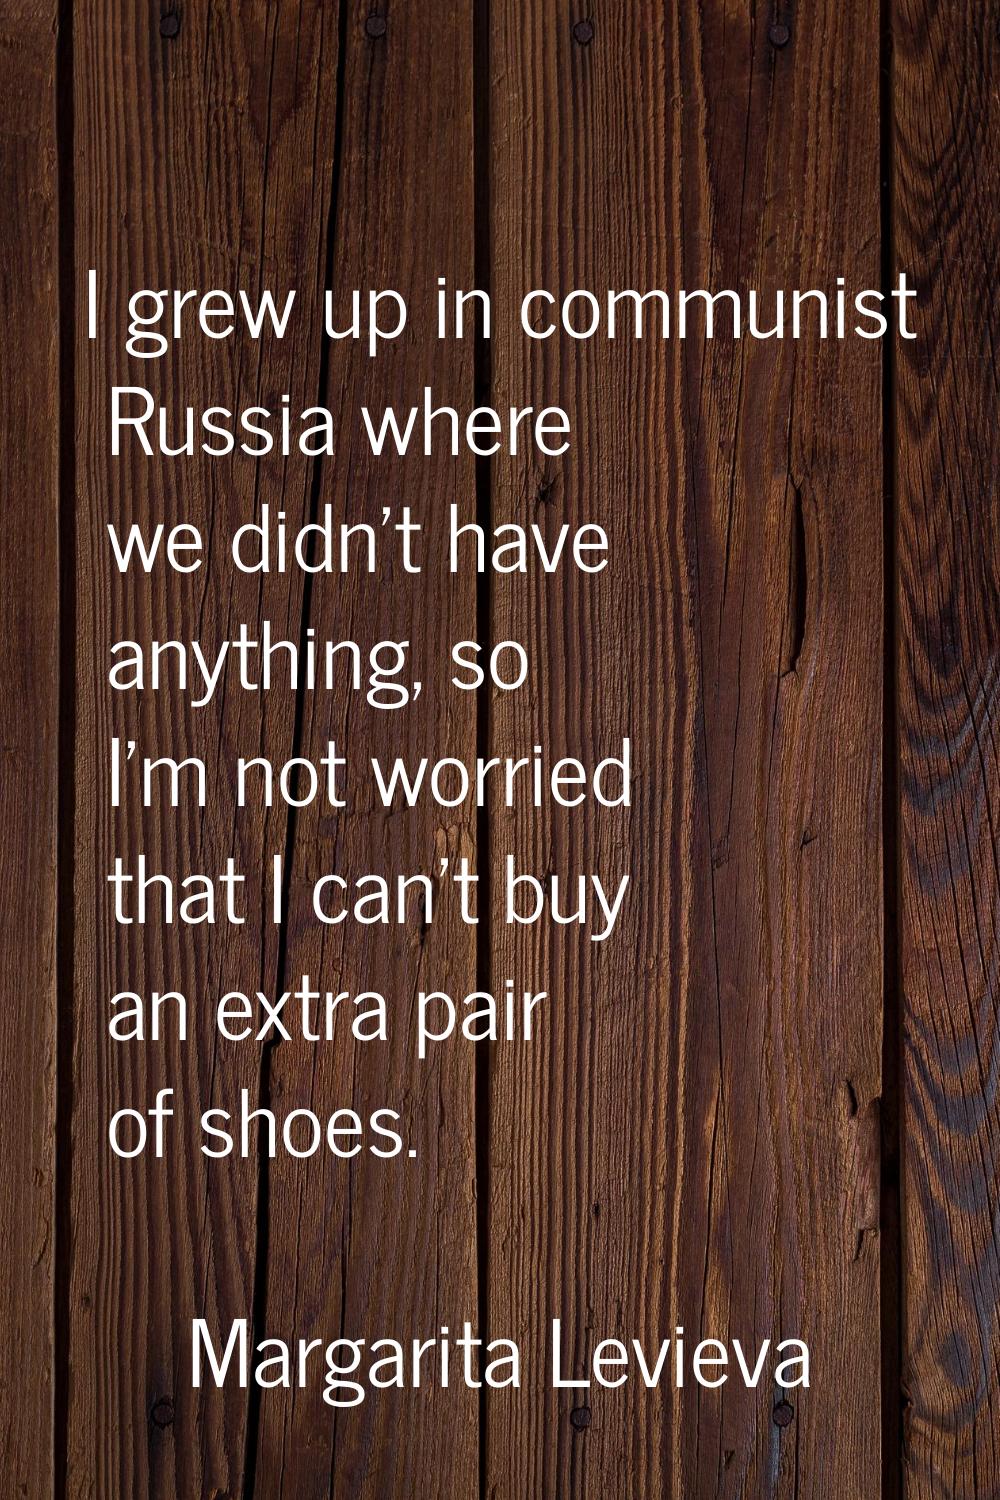 I grew up in communist Russia where we didn't have anything, so I'm not worried that I can't buy an